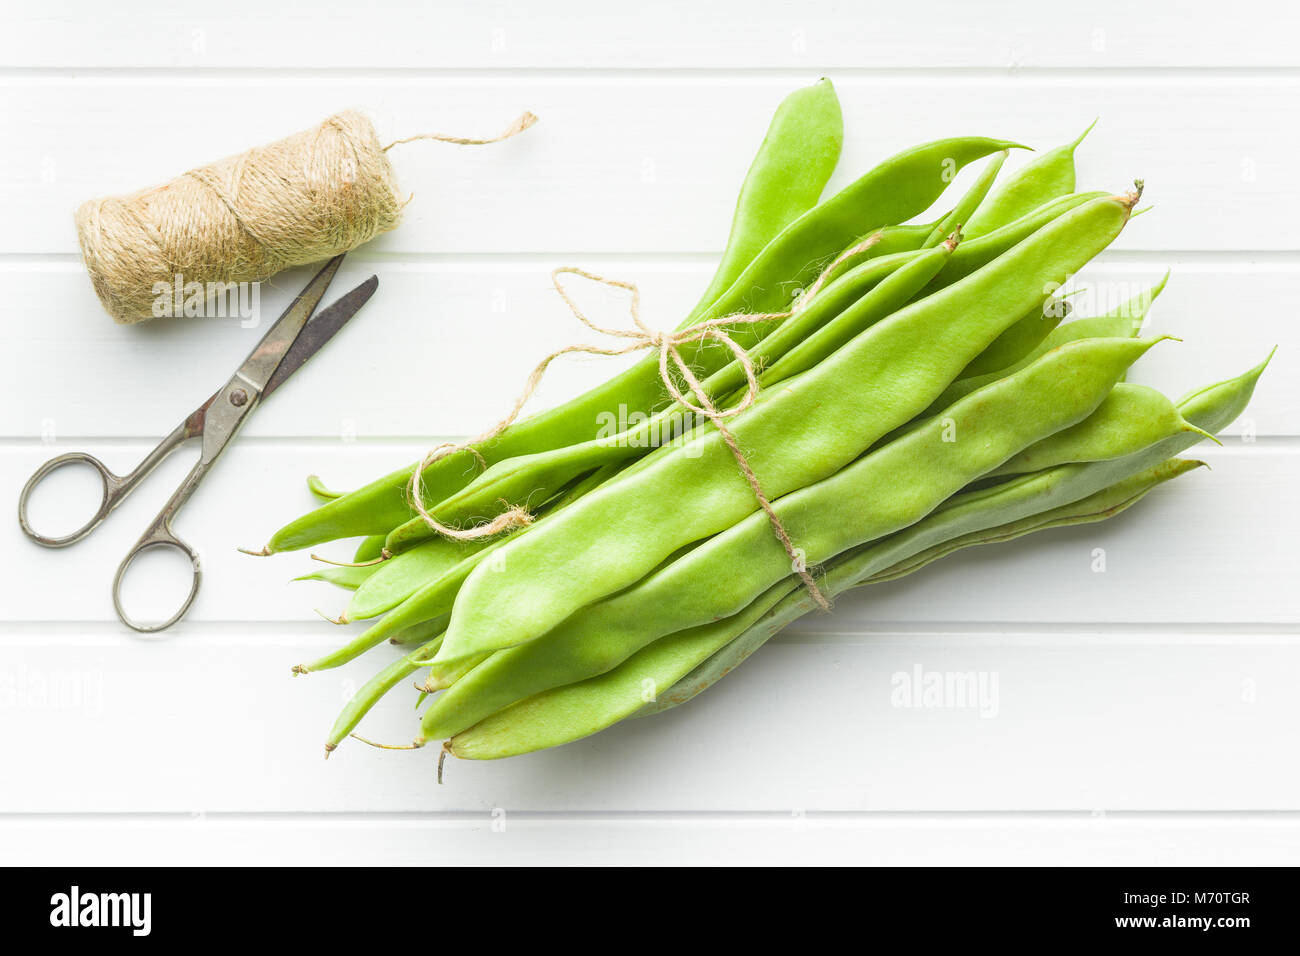 Green string beans pods on white table. Stock Photo